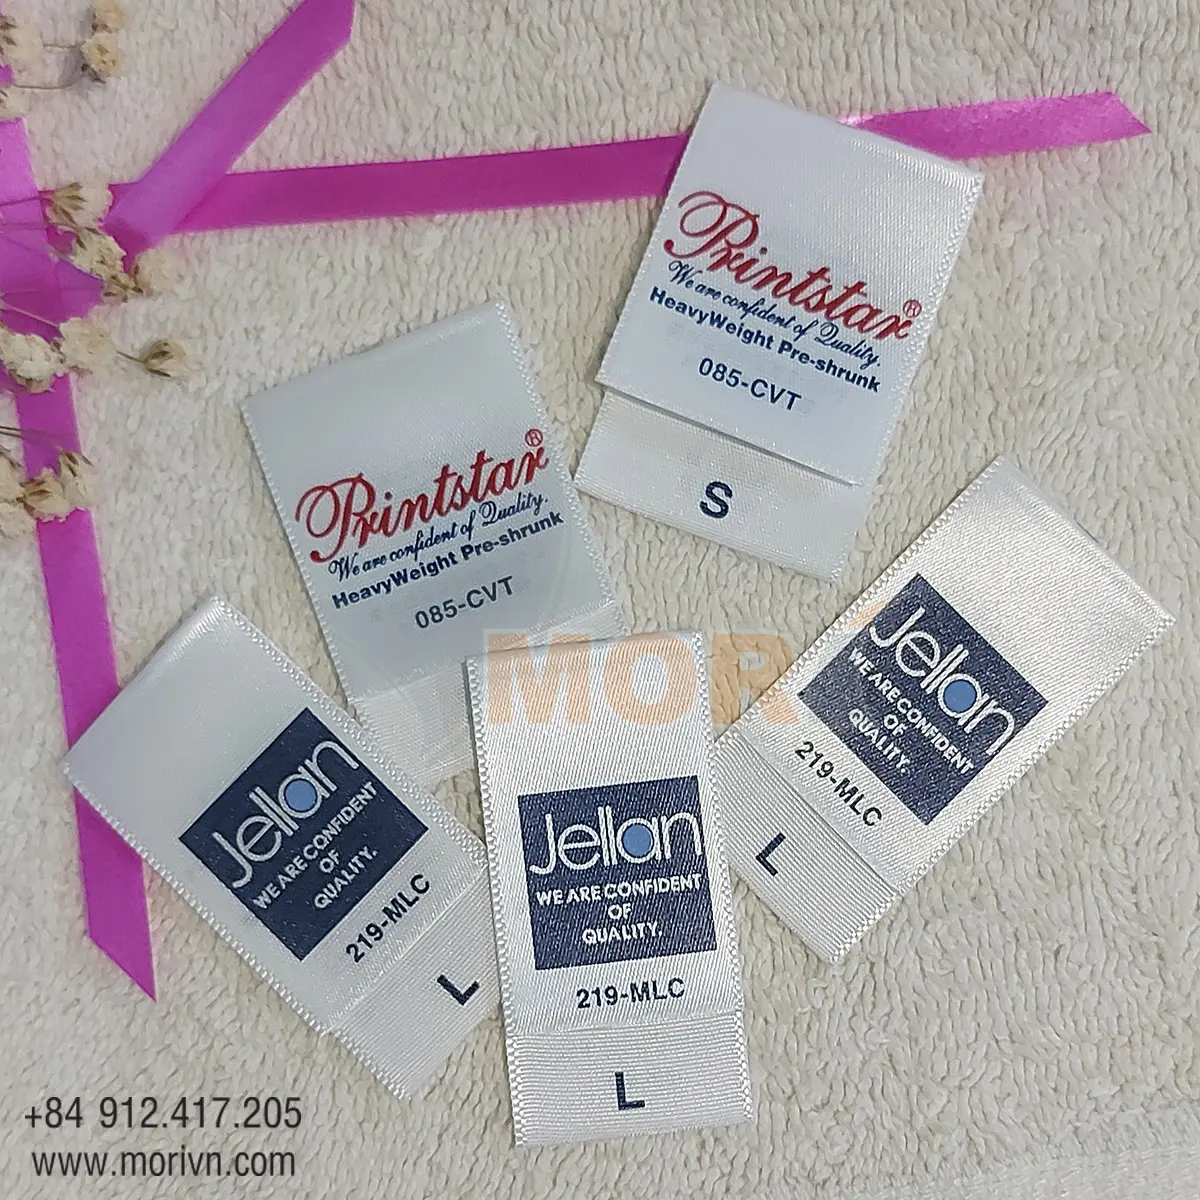 MORI Custom Garment Fabric Woven Label Neck Tag Customized Clothing Embroidered Logo Satin Silk Printing Labels Support Custom